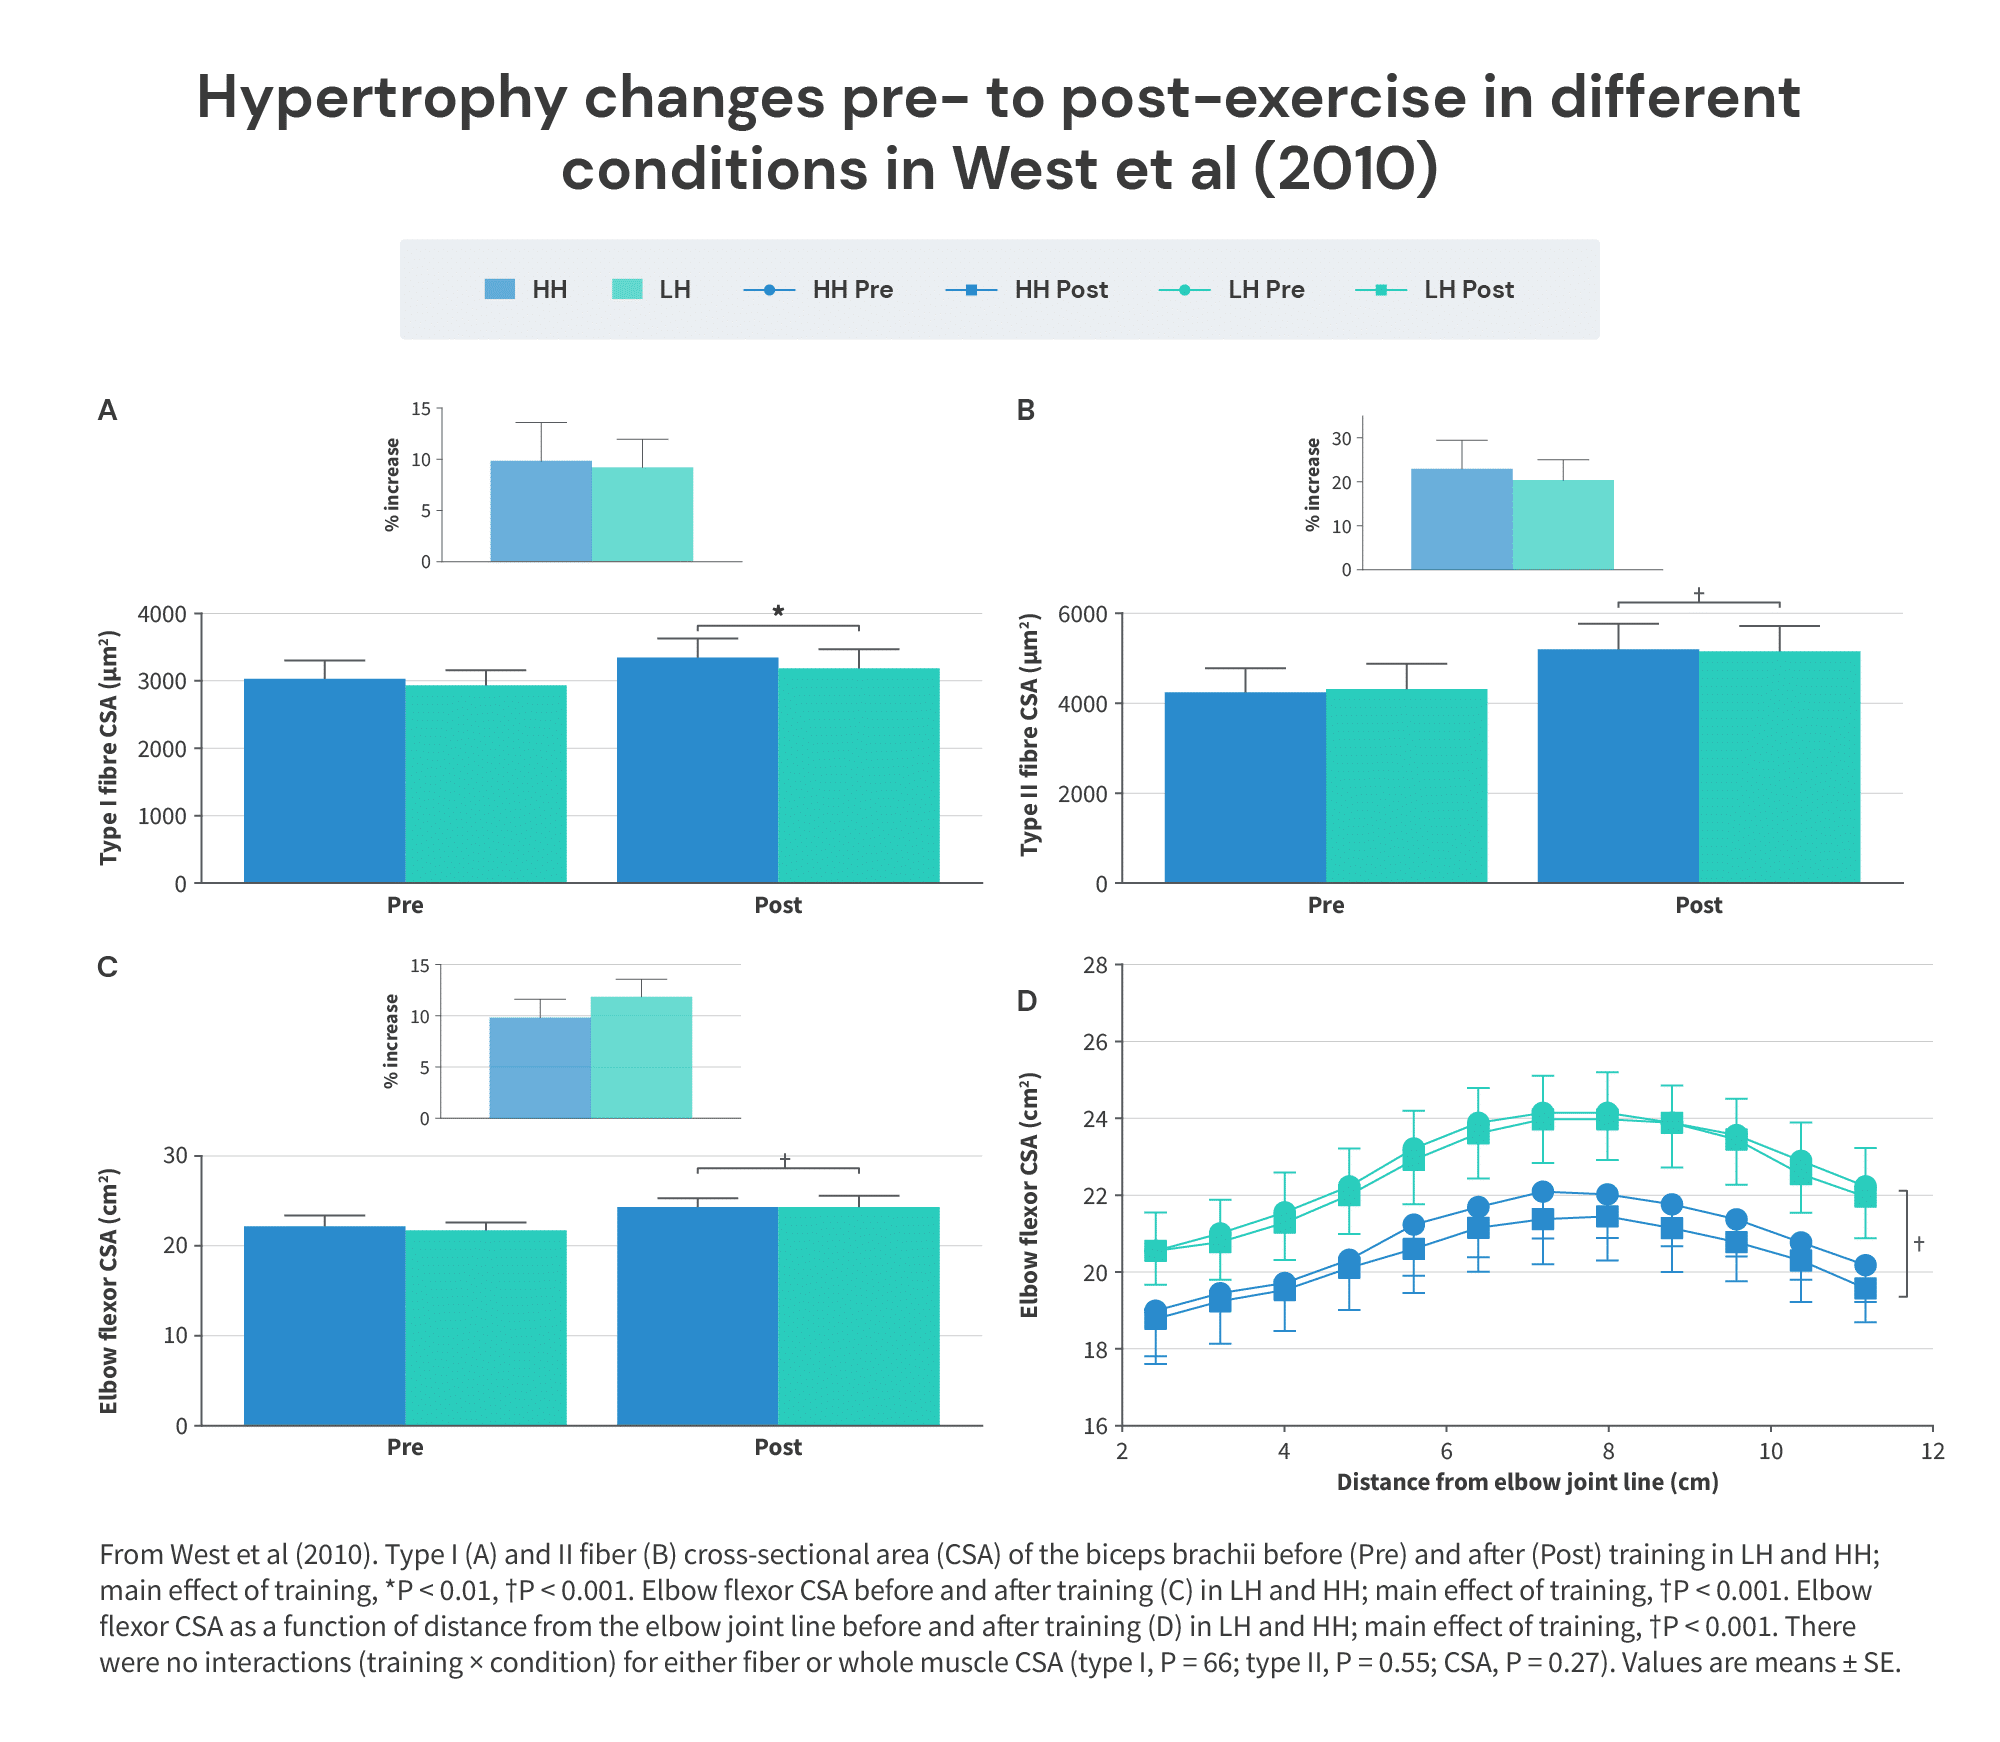 Hypertrophy changes pre to post exercise in different conditions in West et al